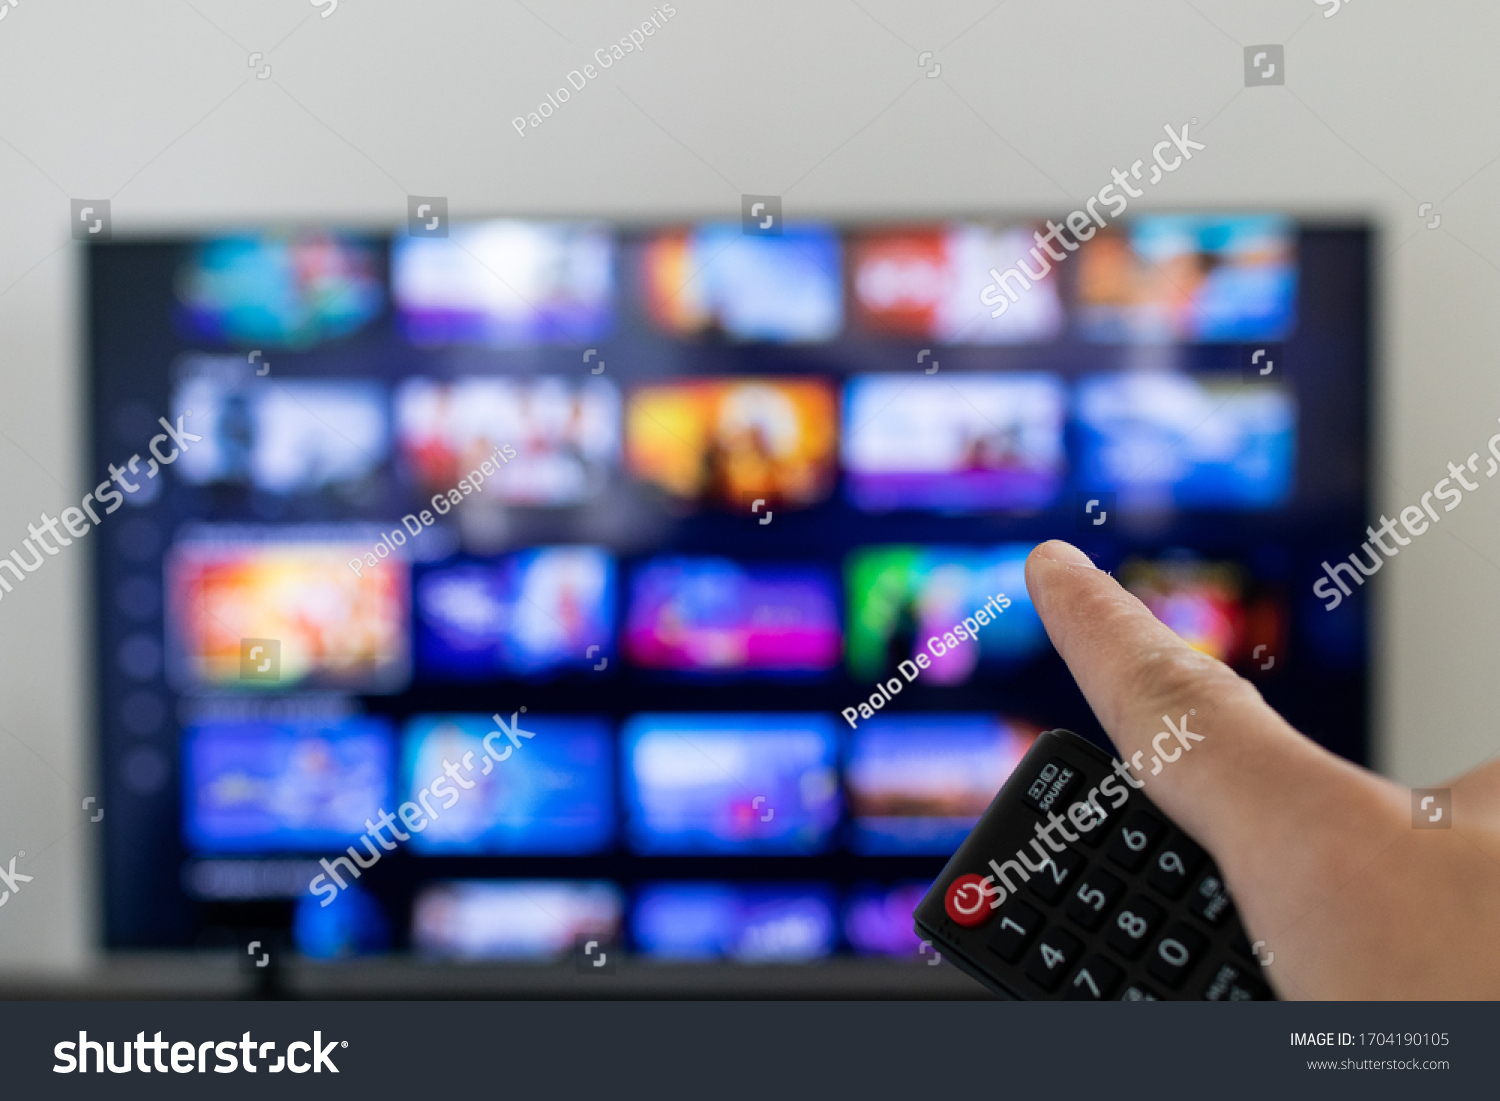 Remote controller and tv blurred in background. Video streaming service catalogue in grid blurred on smart TV.  #1704190105